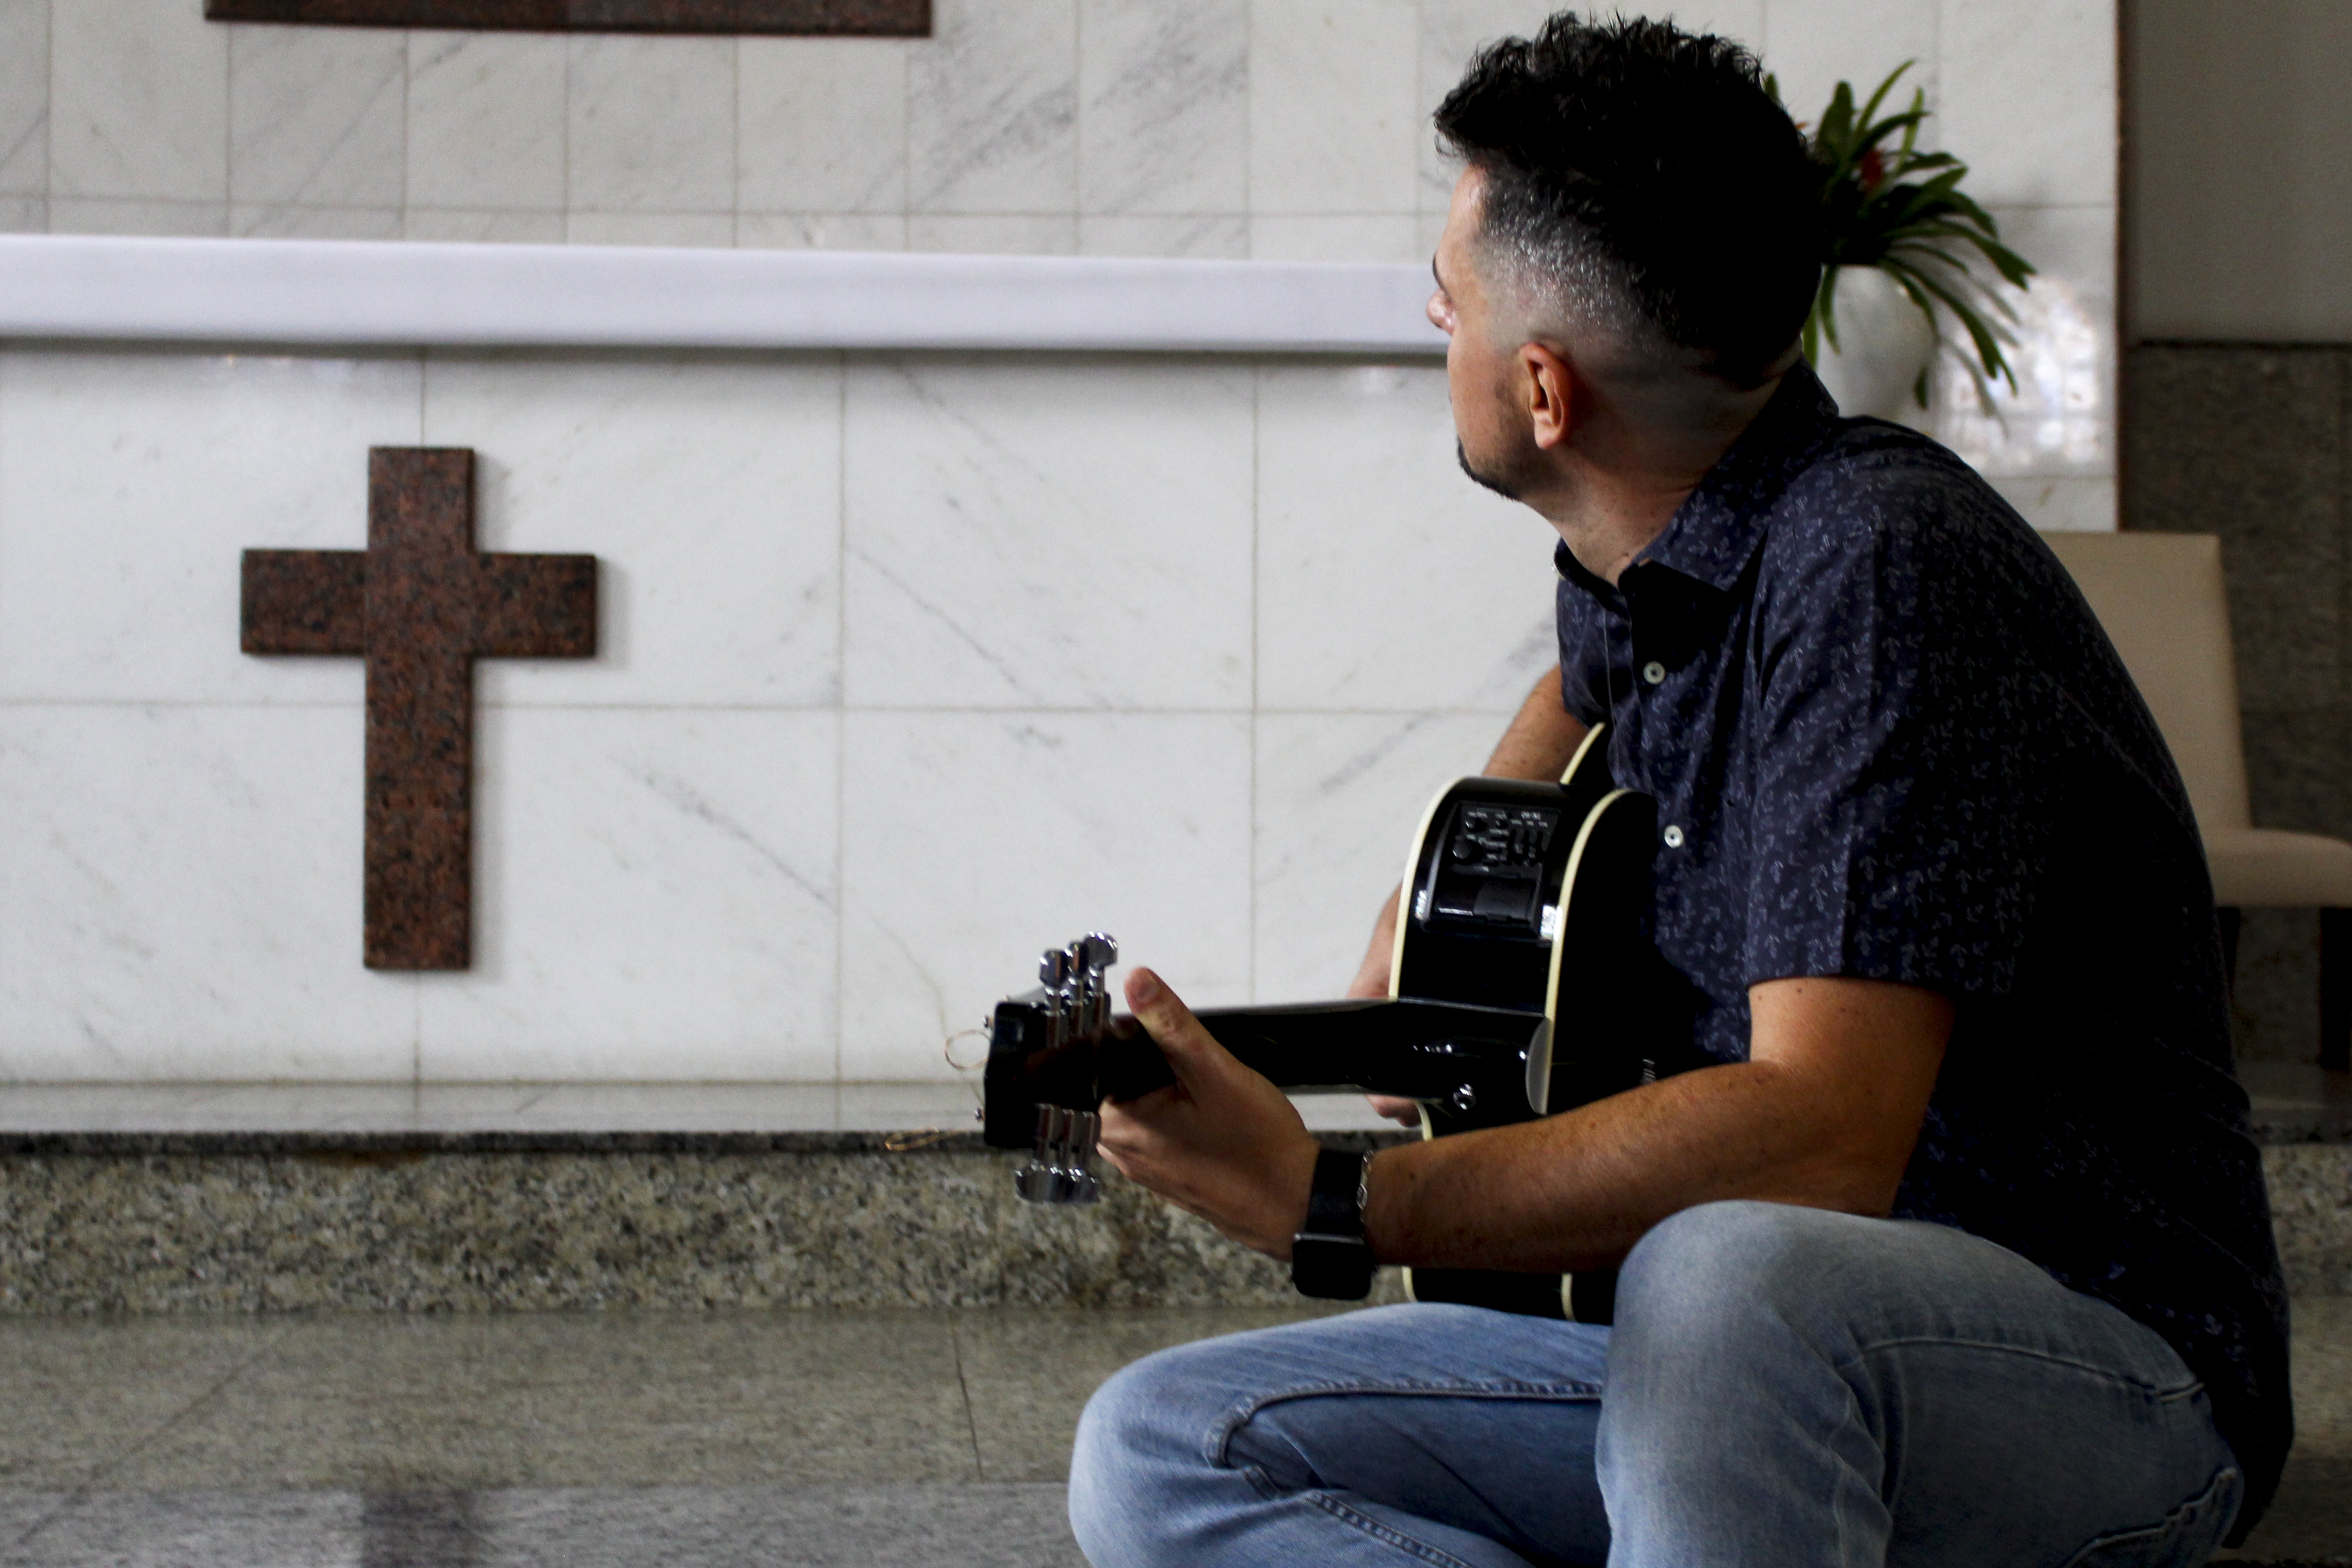 One of Dênis' hobbies is music. In his spare time he plays the guitar and sings in the church choir.